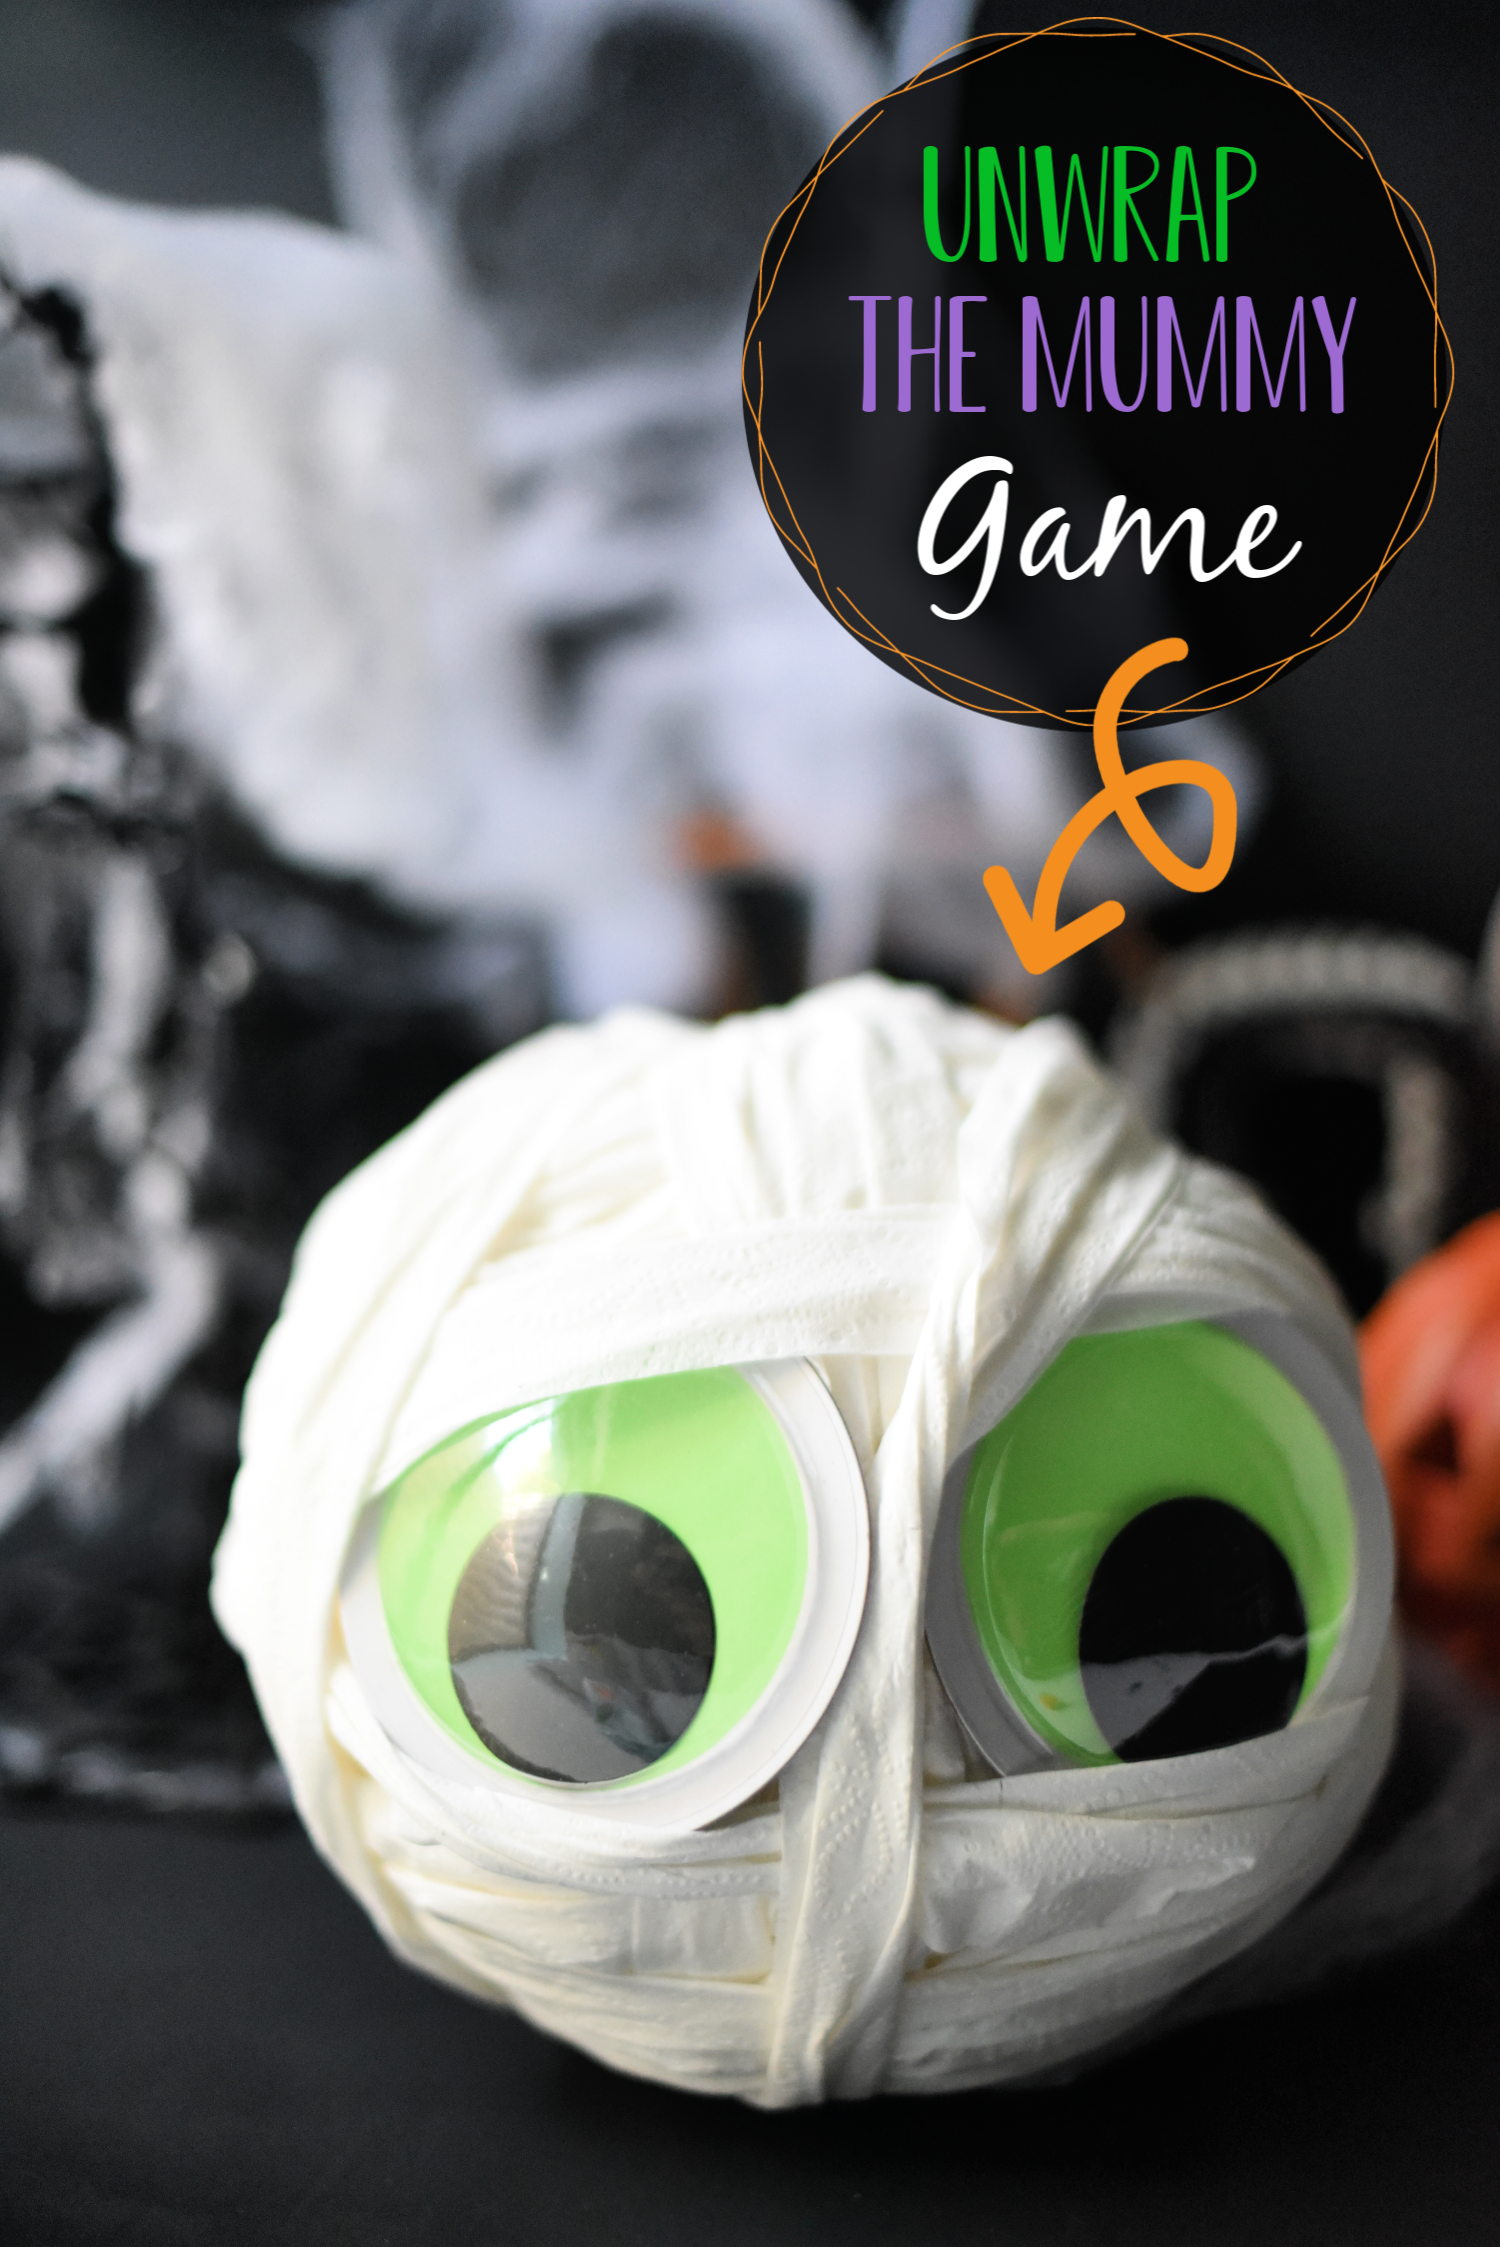 Fun Halloween Games for Kids: This unwrap the mummy game is a fun and easy game to play with little ones. They will love it and it's easy for you to set up. #Halloween #halloweengames #halloweenparty